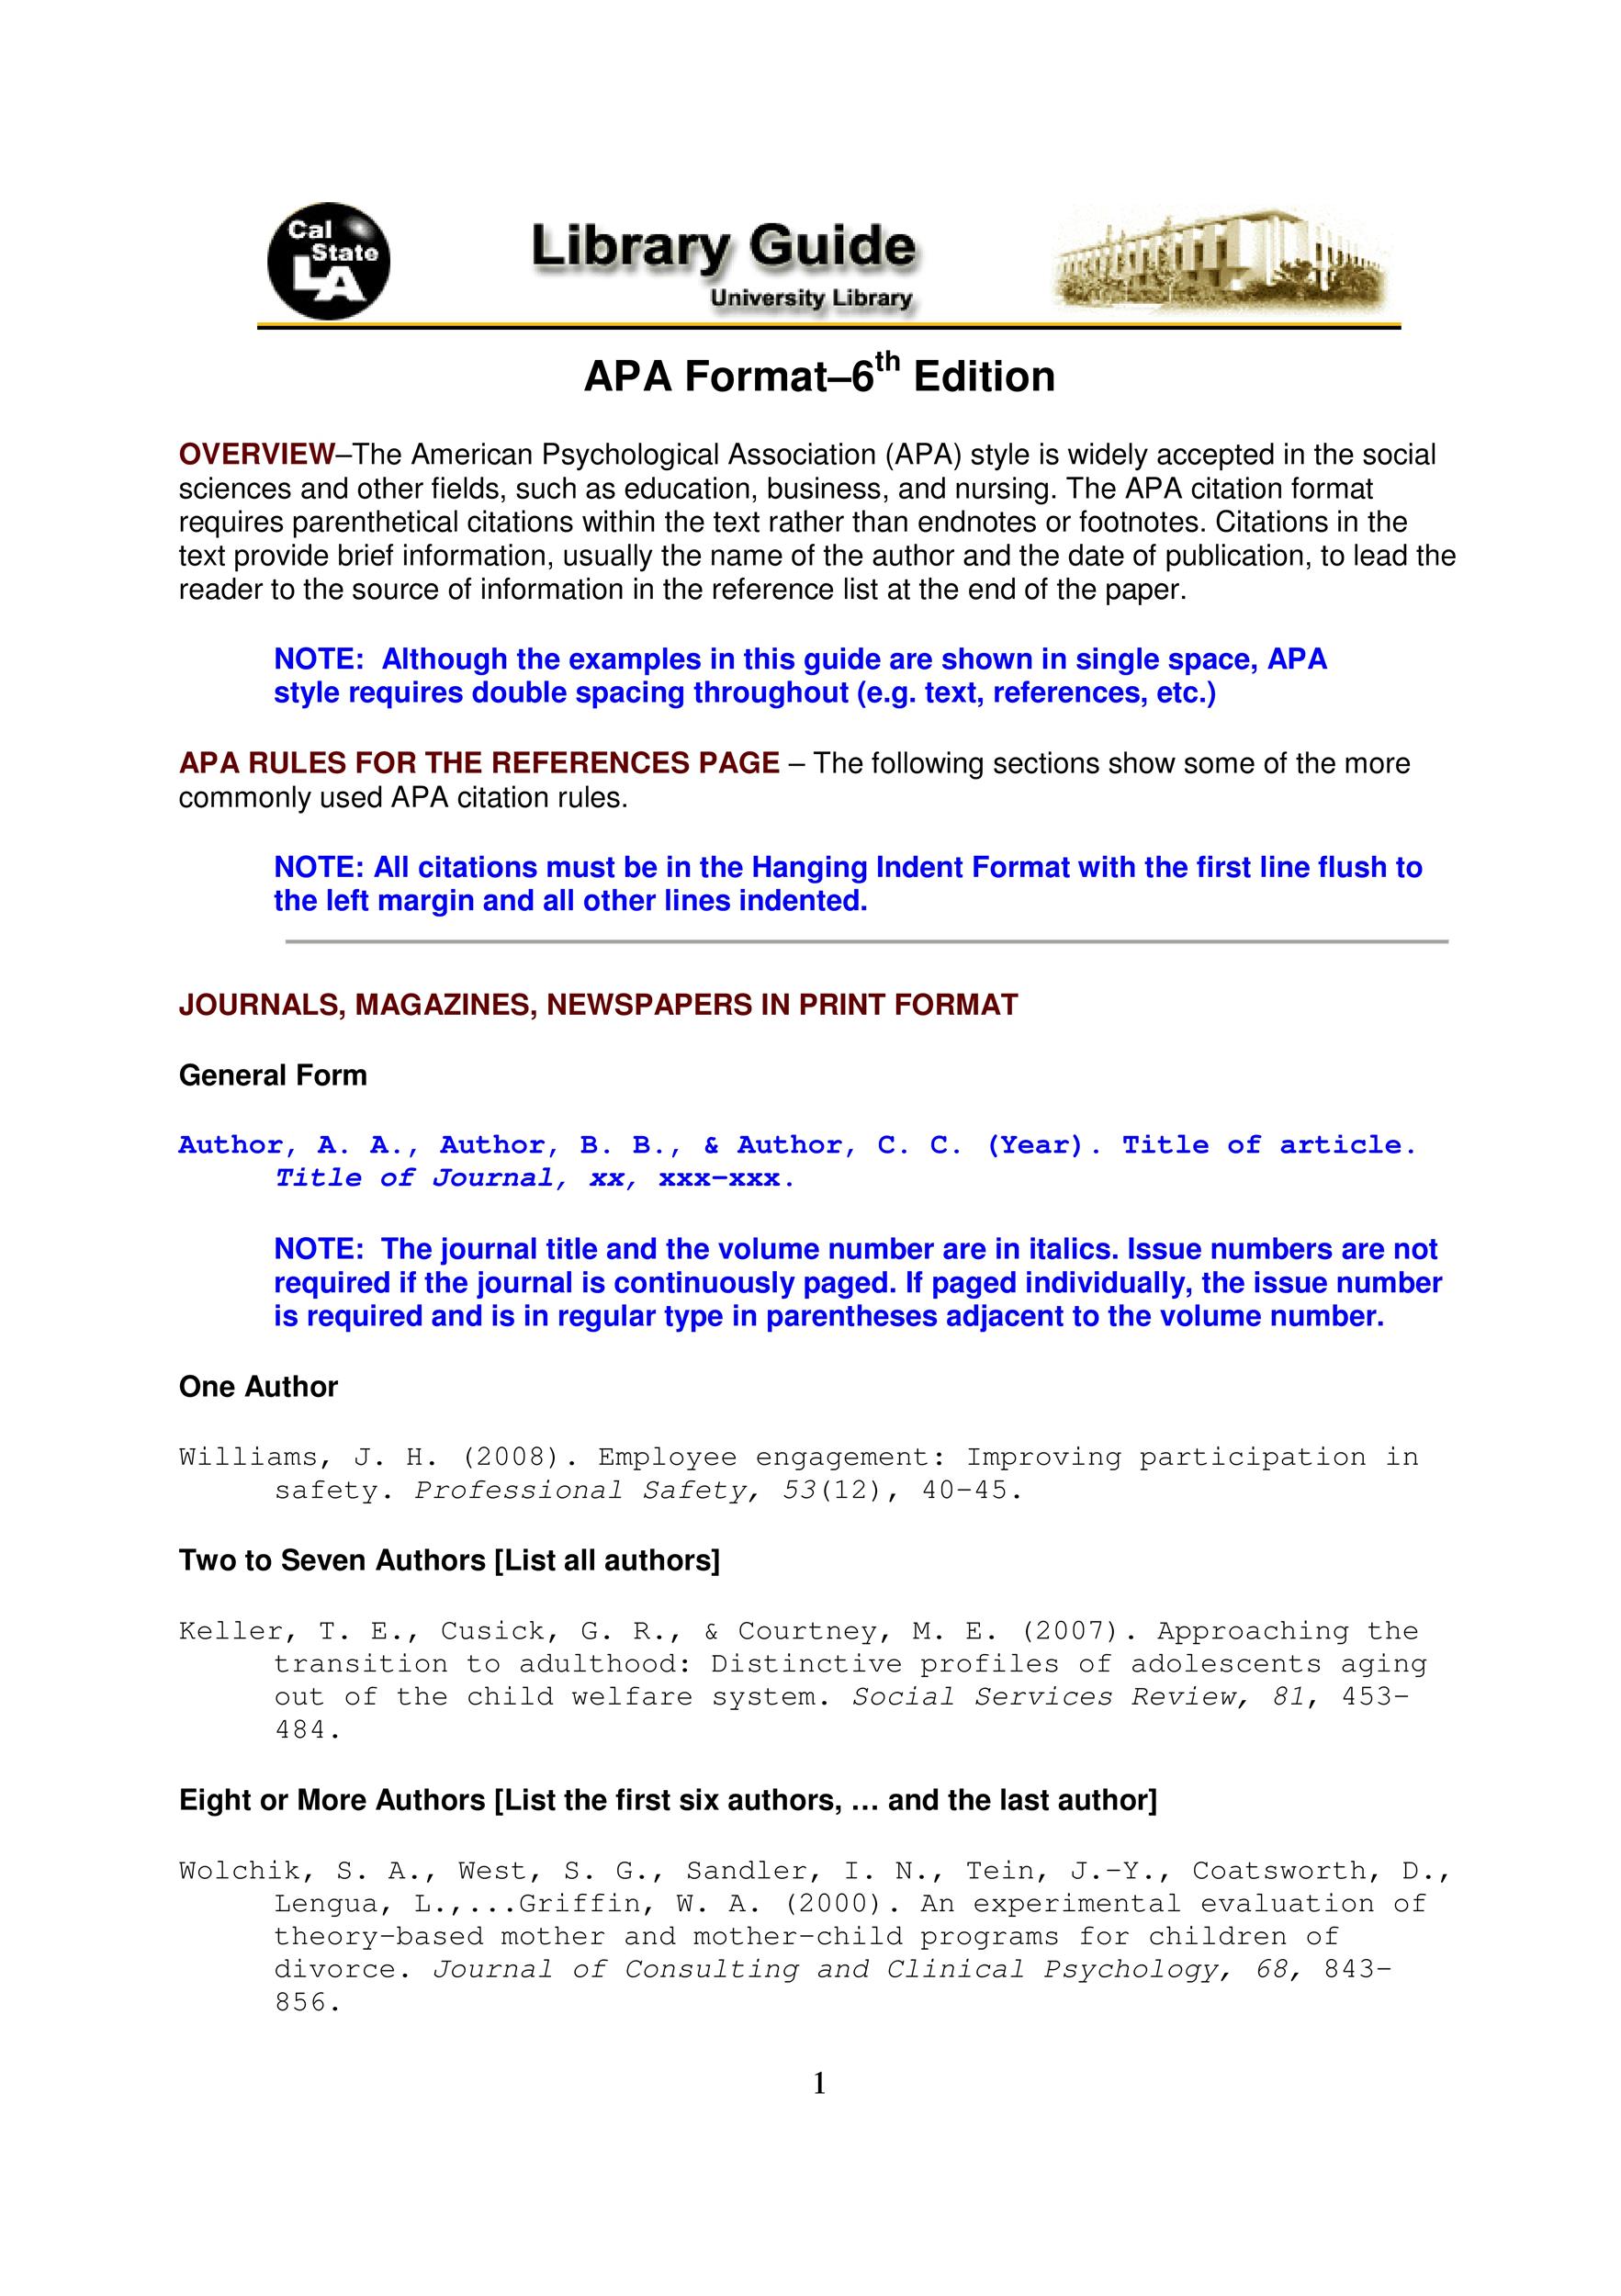 apa format rules and guidelines